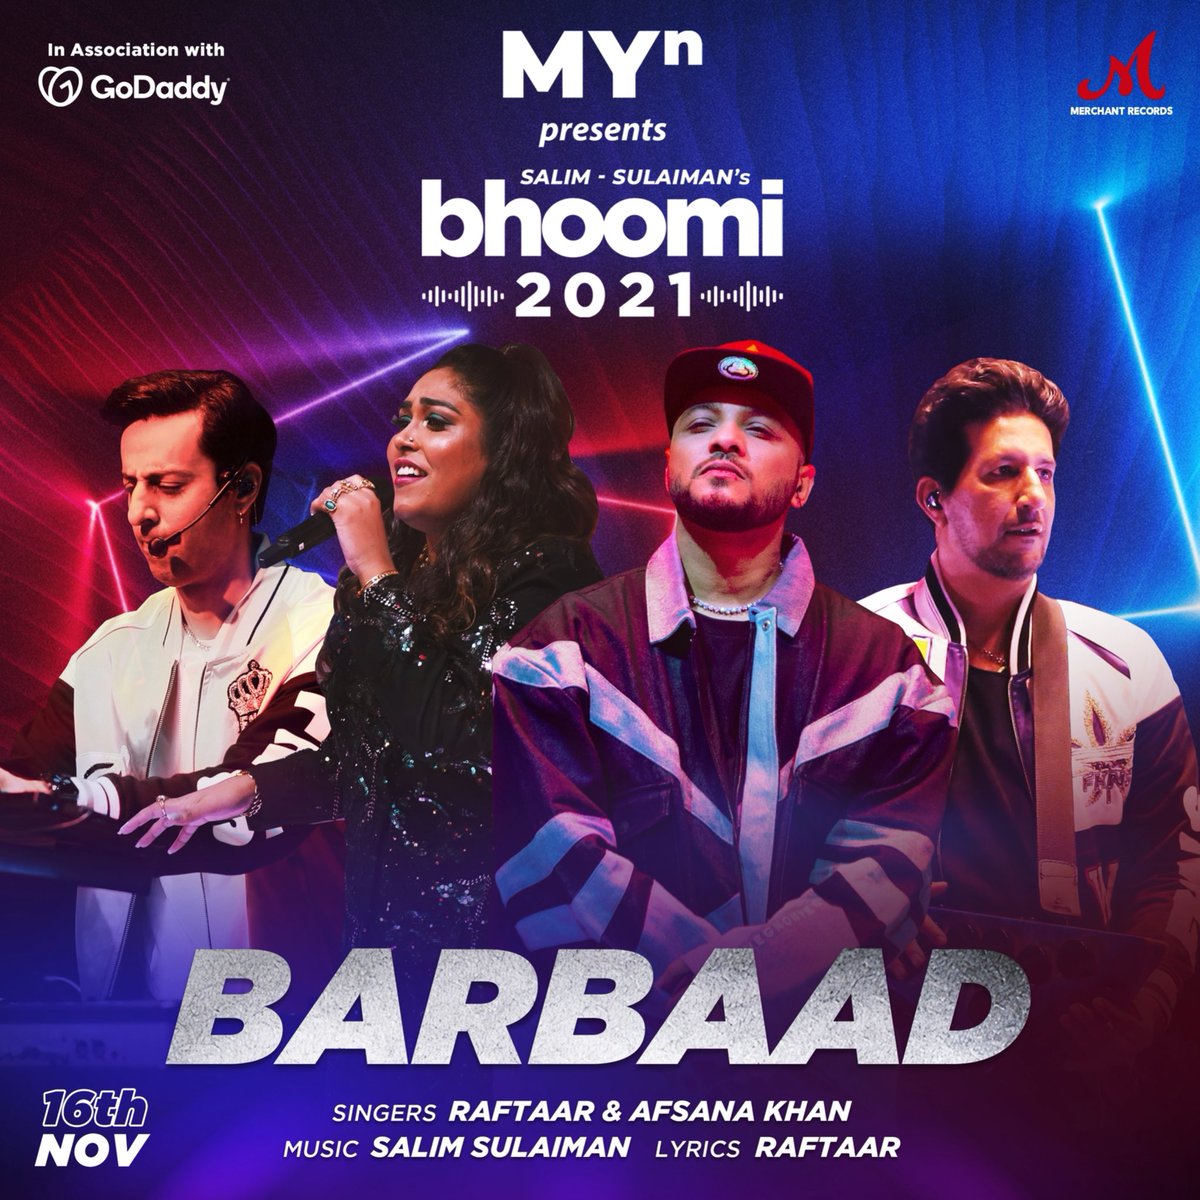 BARBAAD by @raftaarmusic & Afsana Khan out on 16th Nov. All Raftaar fans will know why we chose this day for Barbaad. This is the 5th song of @appmyn1 presents #bhoomi21 by @SlimSulaiman . In association With Go Daddy India